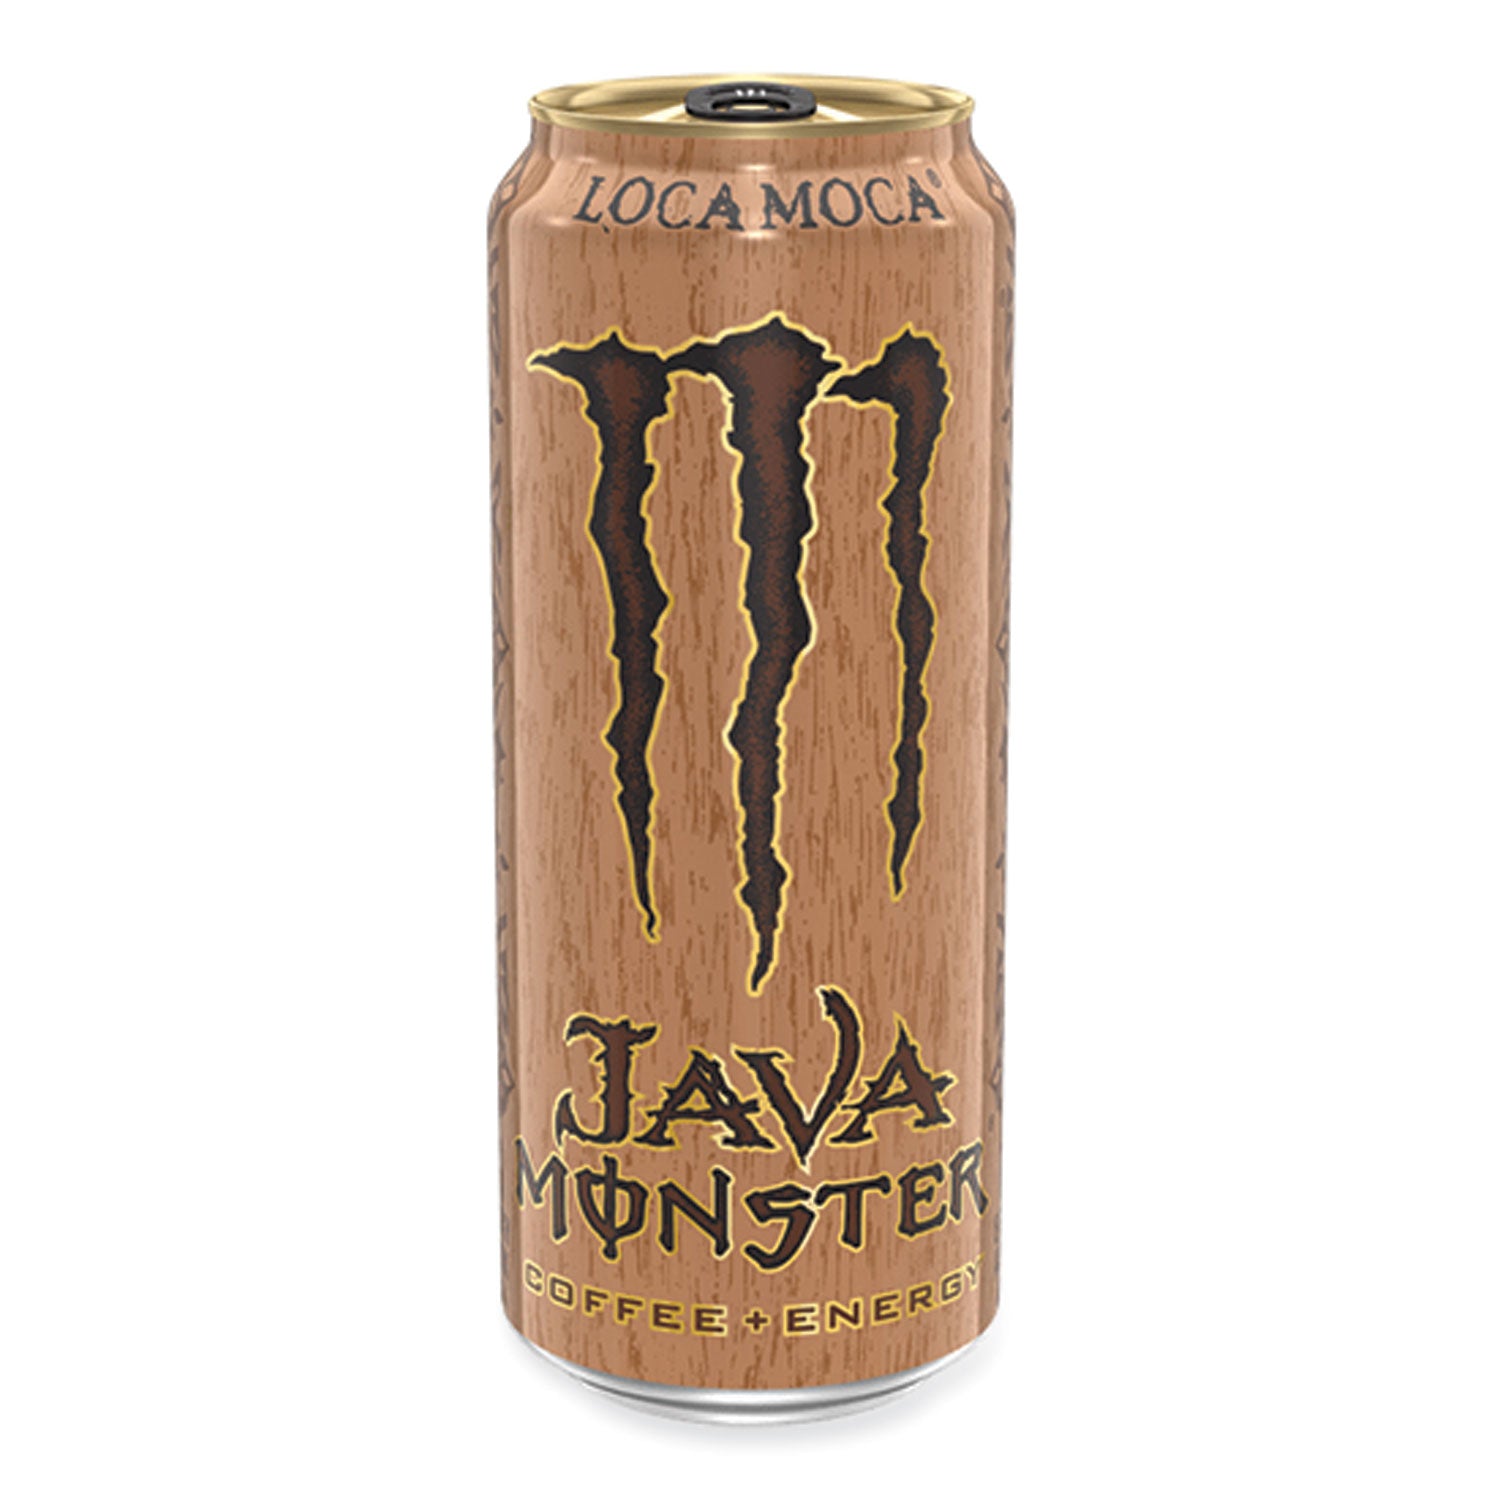 java-monster-cold-brew-coffee-loca-moca-15-oz-can-12-pack_ccr070847812715 - 1